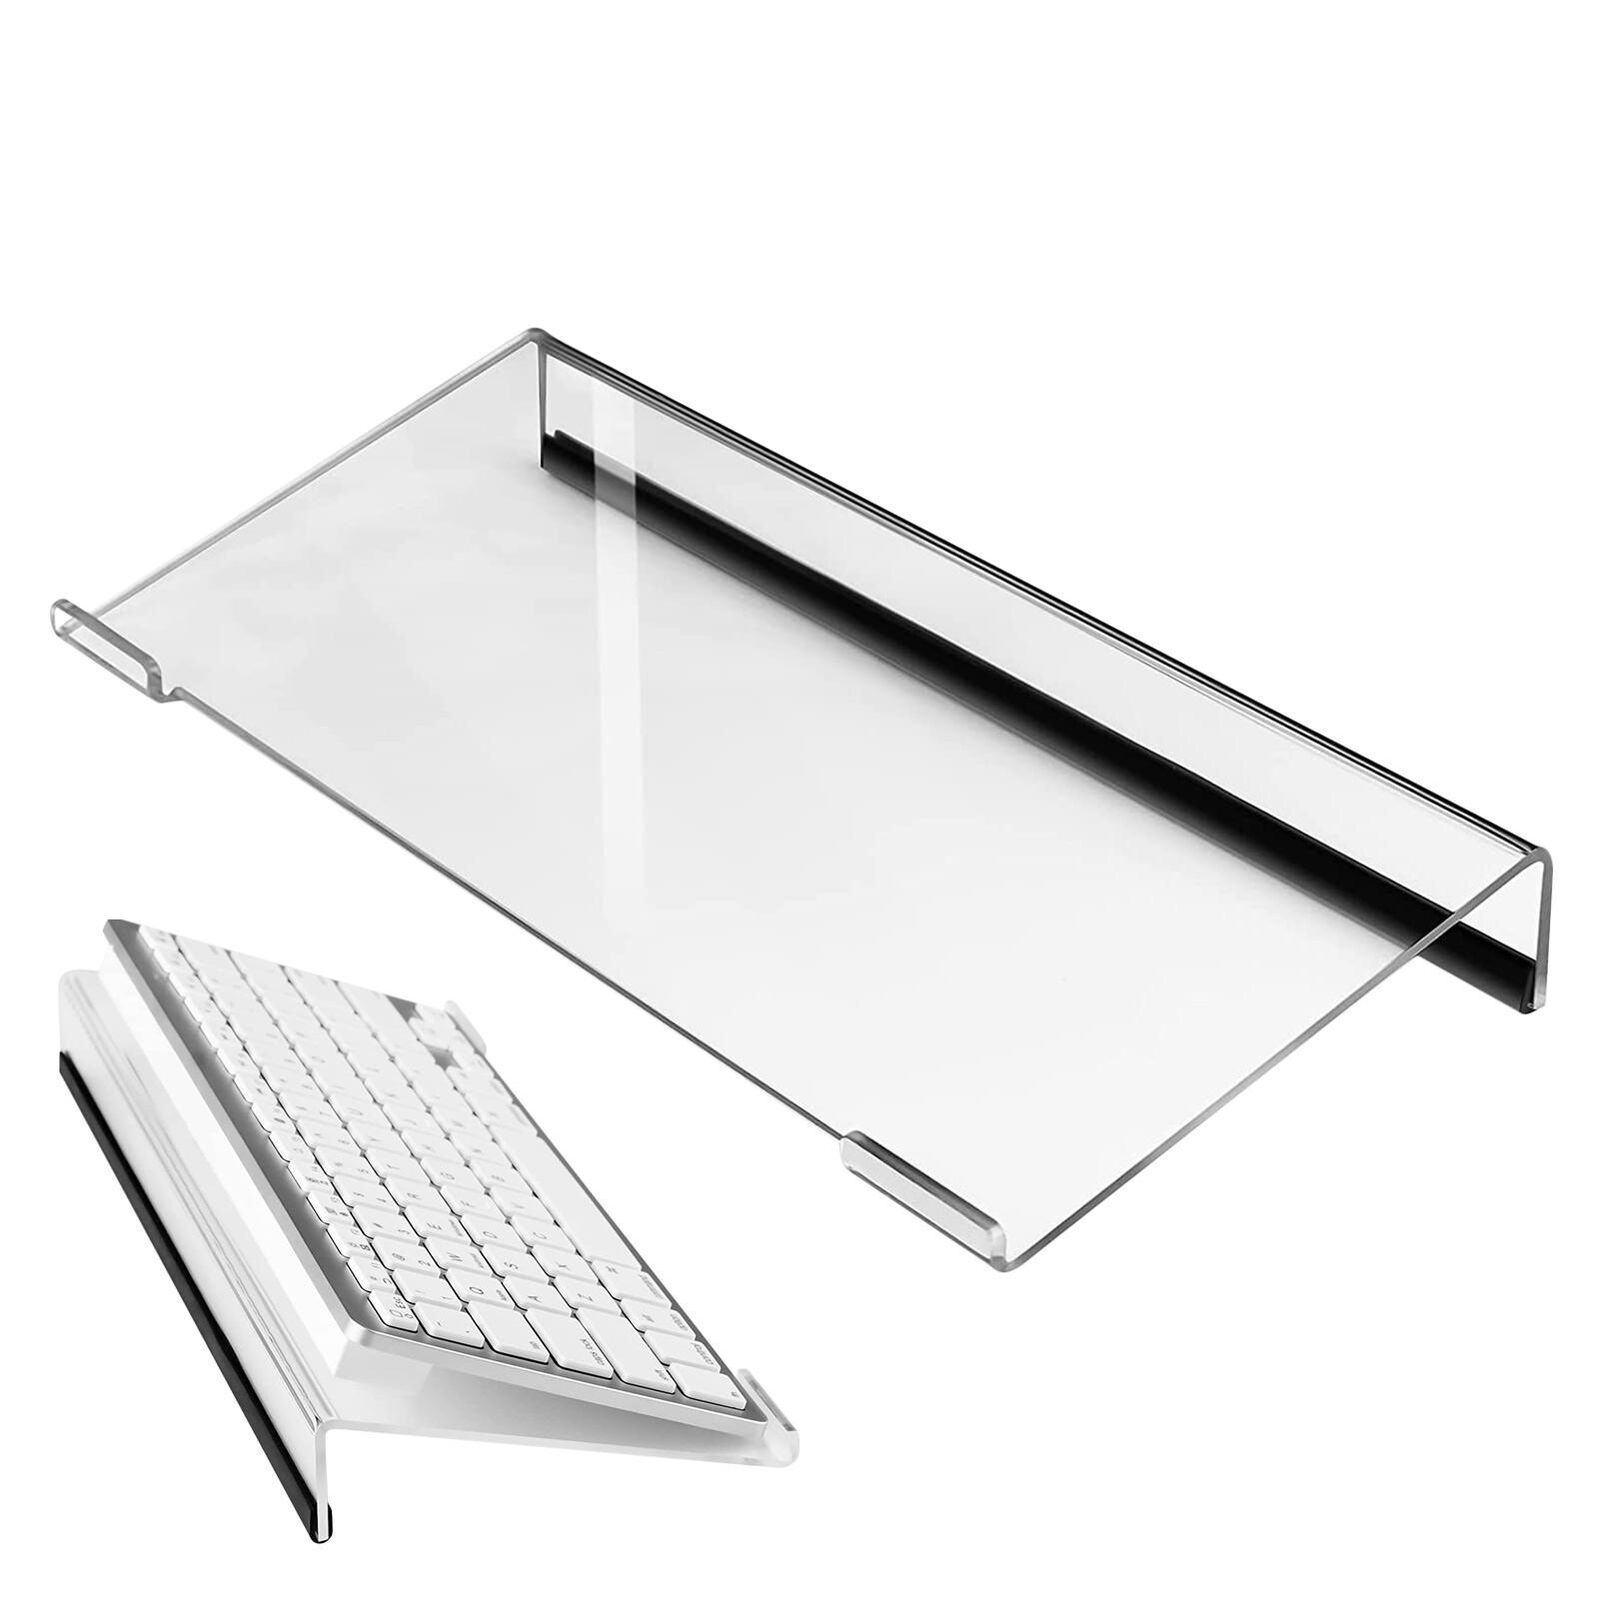 Tilted Keyboard Holder Clear Acrylic PC Keyboard Stand Display Tray Stable 